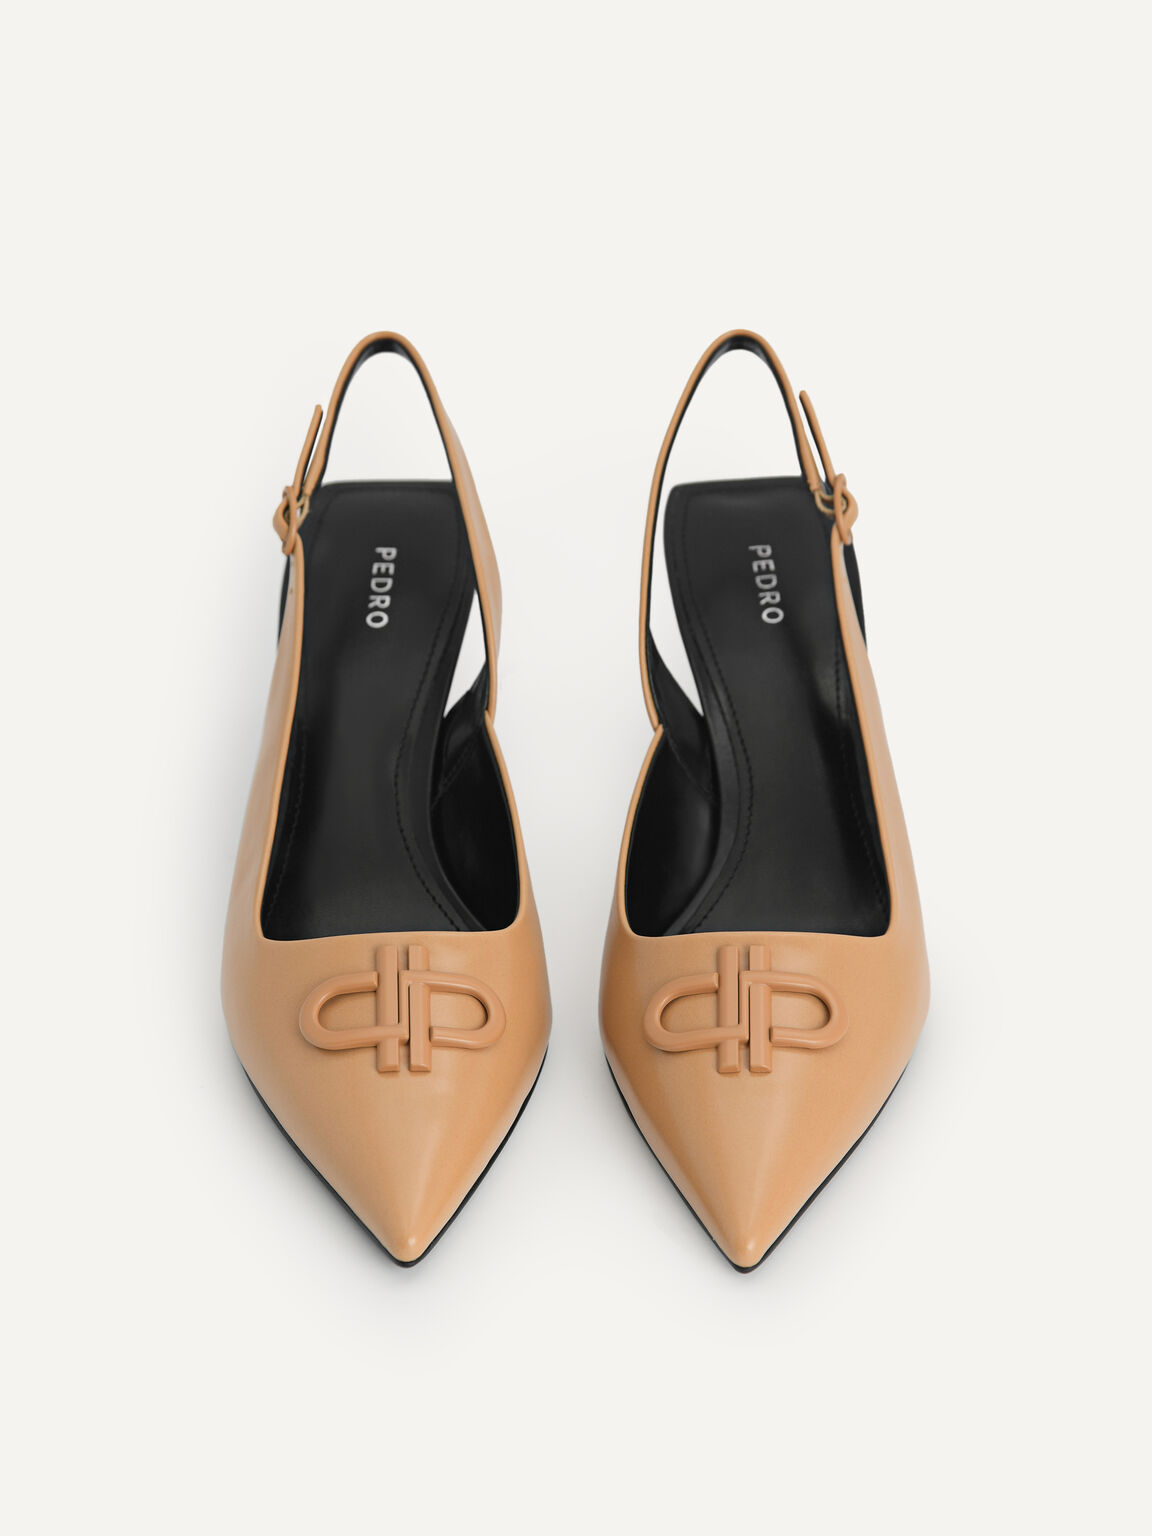 Icon Leather Pointed Toe Slingback Heels, Camel, hi-res